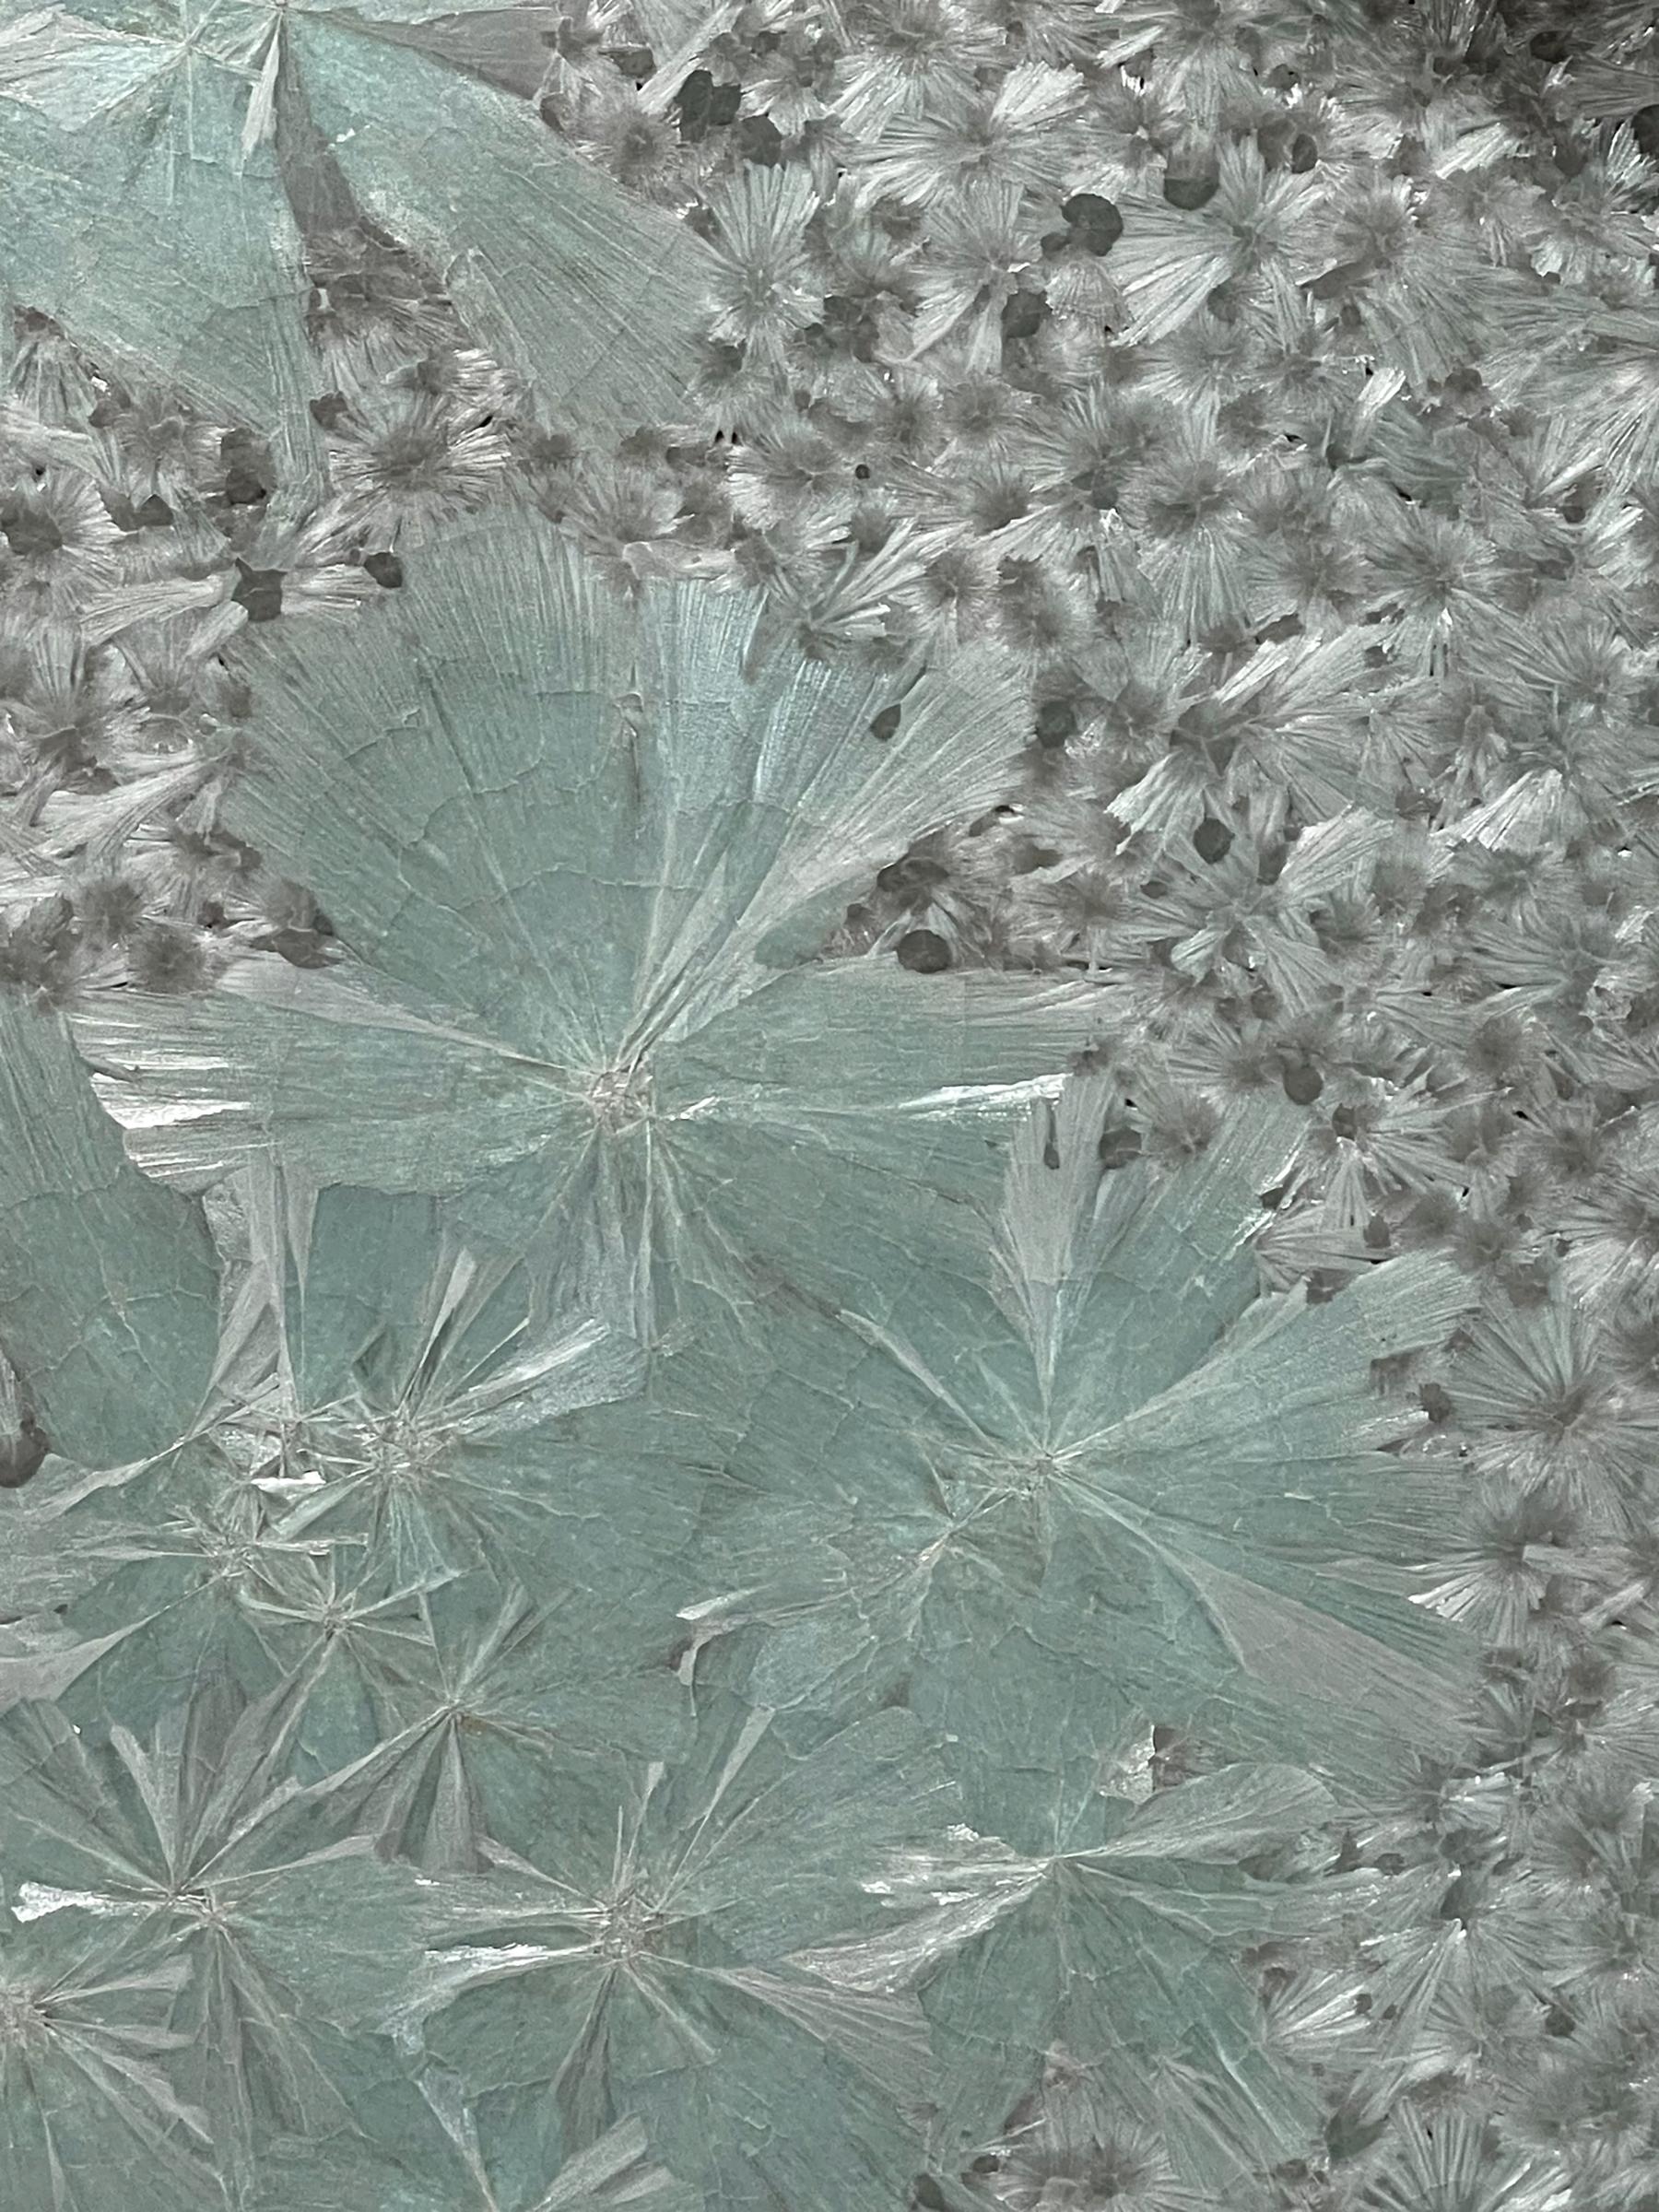 Glazed Crystal Blooms in the Moonlight, Ceramic wall art by William Edwards For Sale